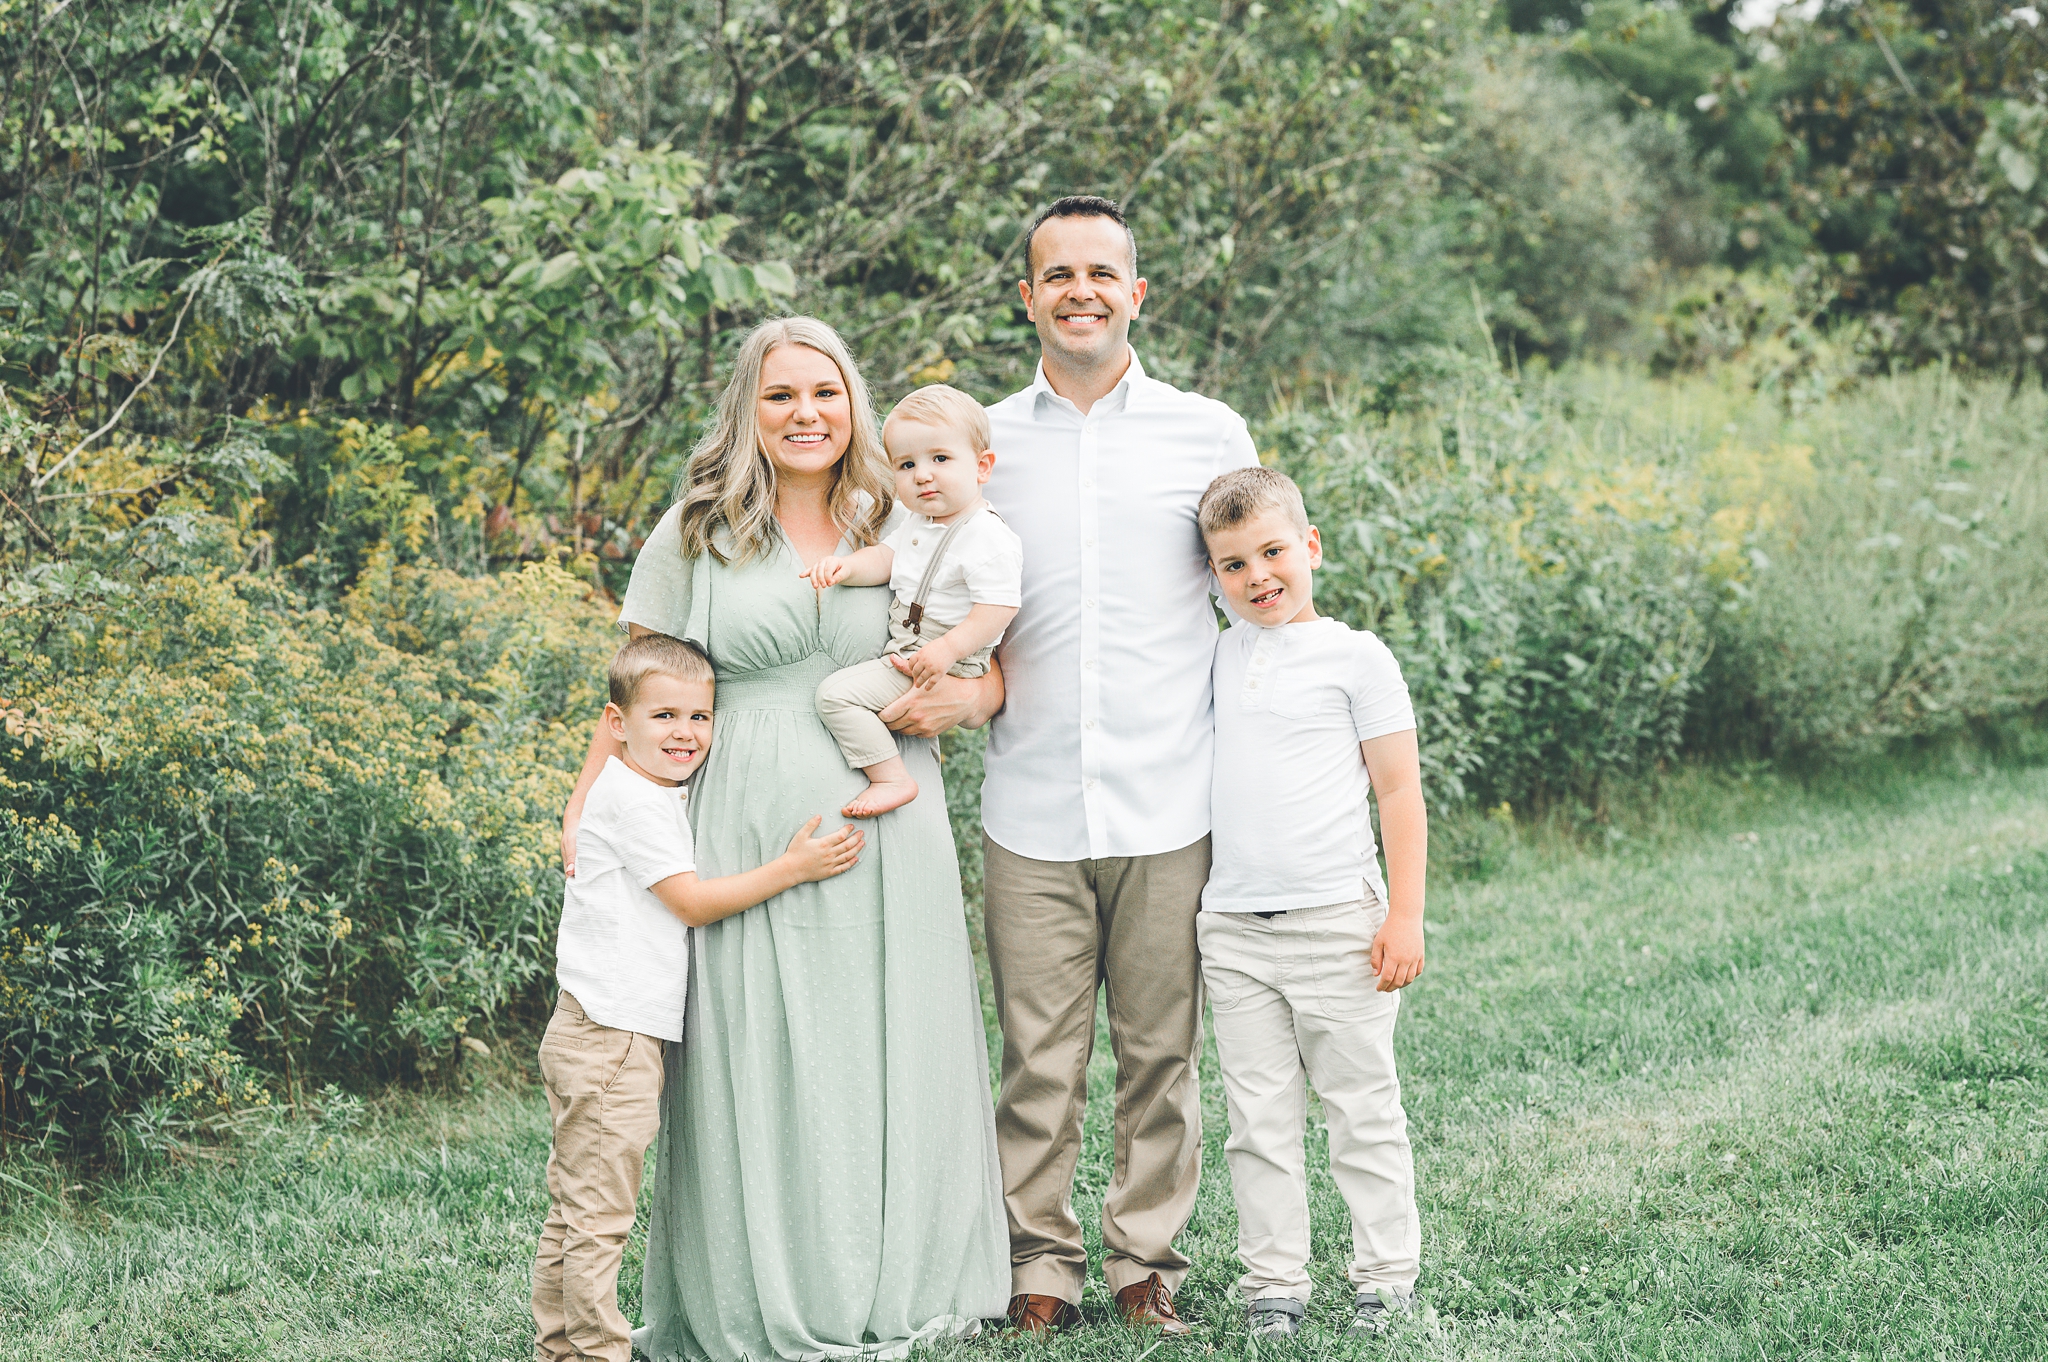 I really want my clients to know | a glimpse of the Jirjis Family Session